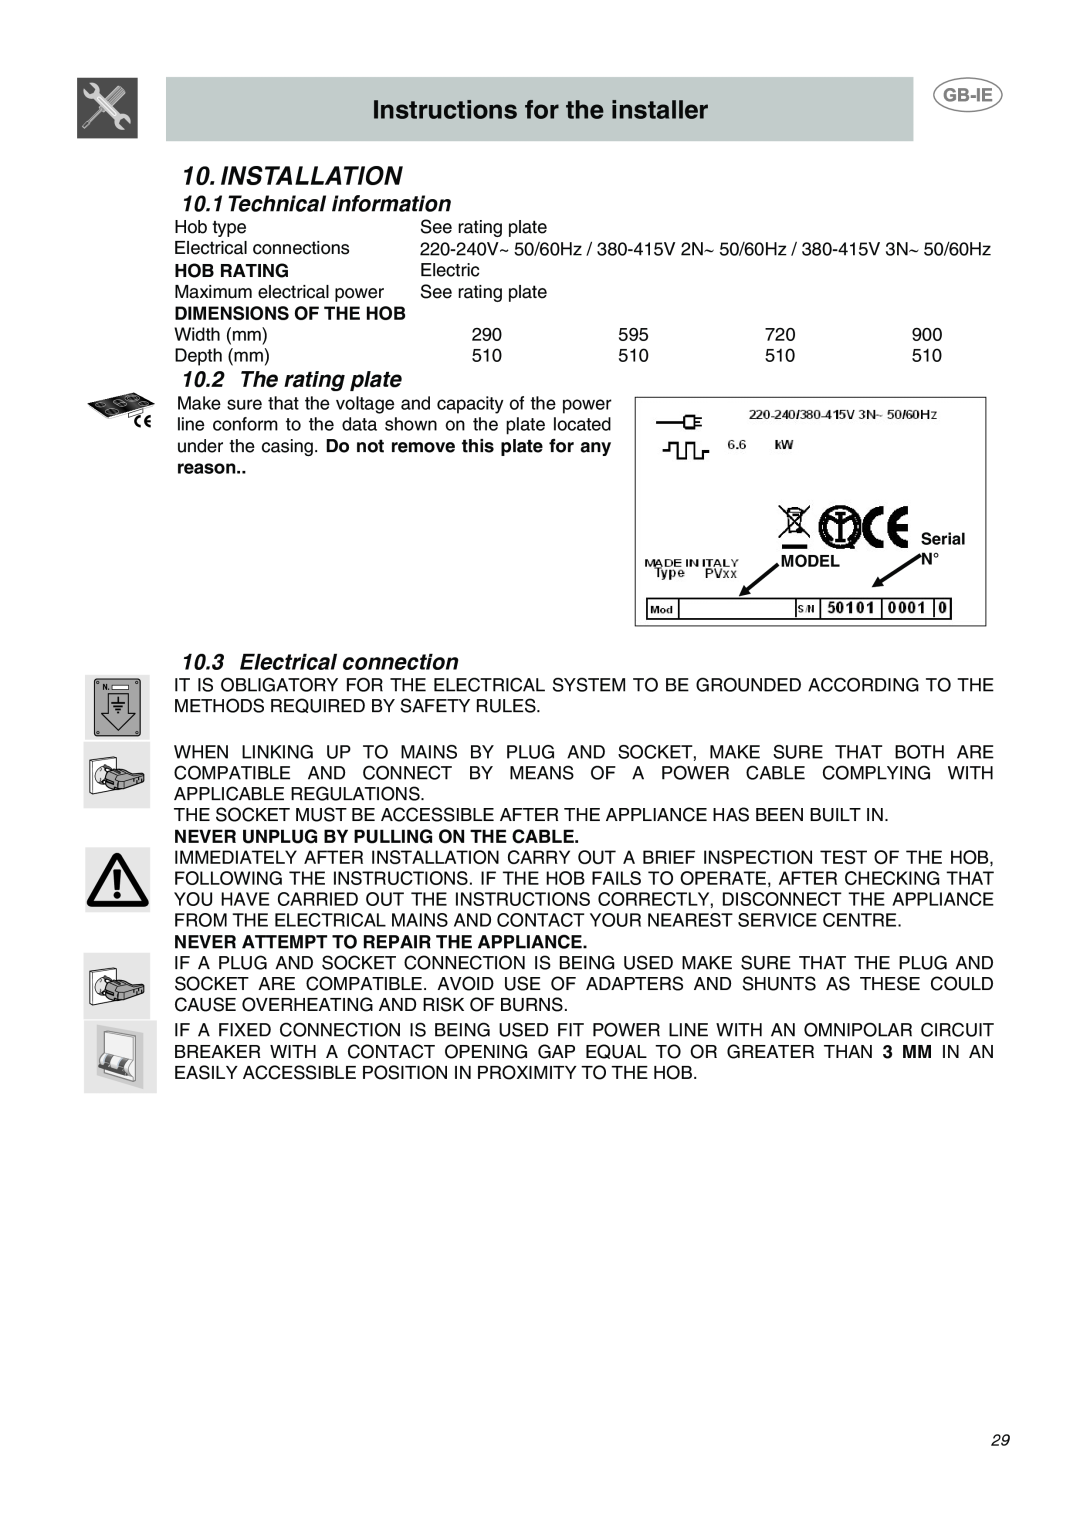 Smeg AP2641TCE manual Instructions for the installer, Installation, Technical information, The rating plate, Hob Rating 